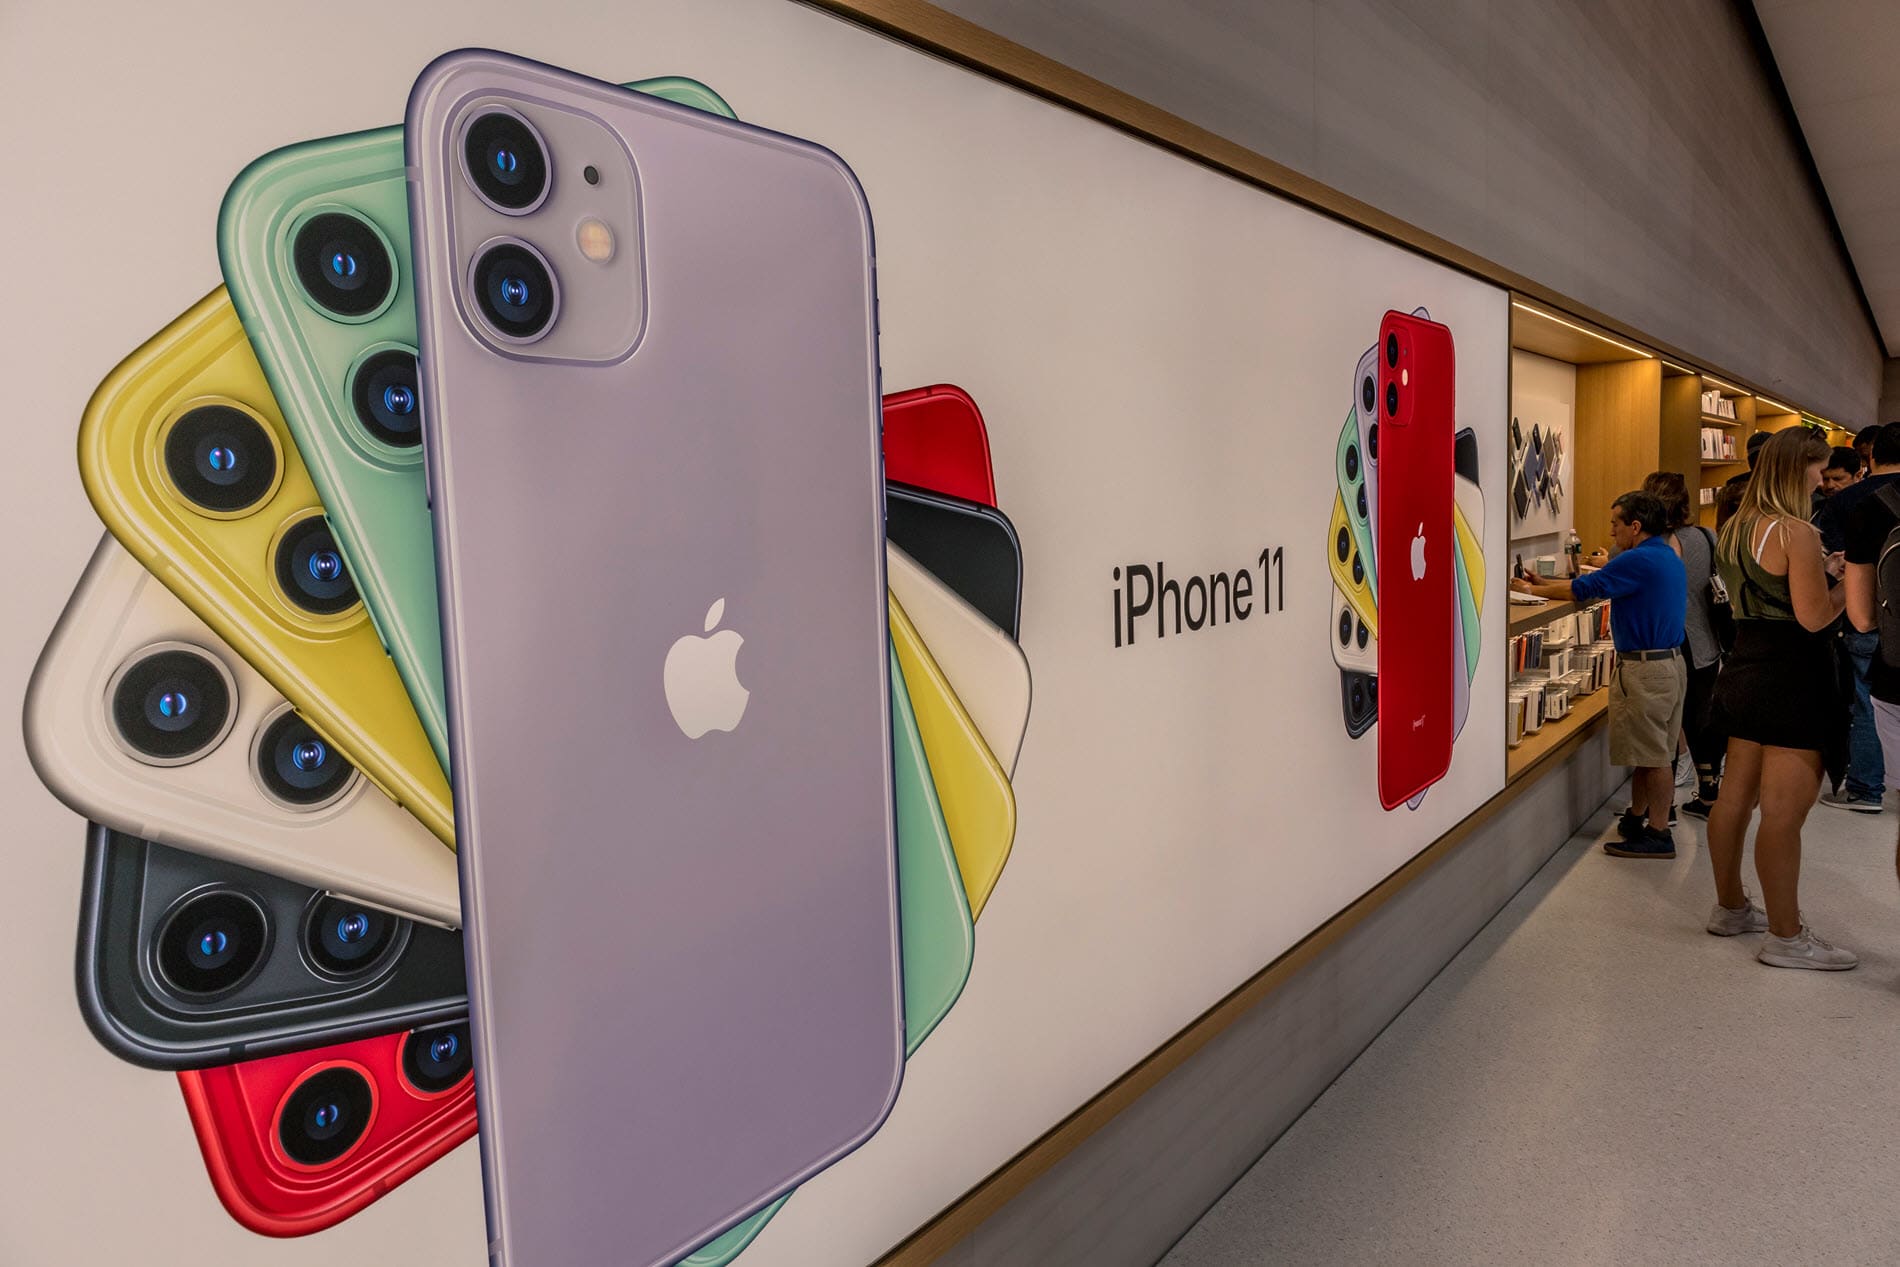 Best iPhone 11 Deals Right Now - Lowest prices and where to get the